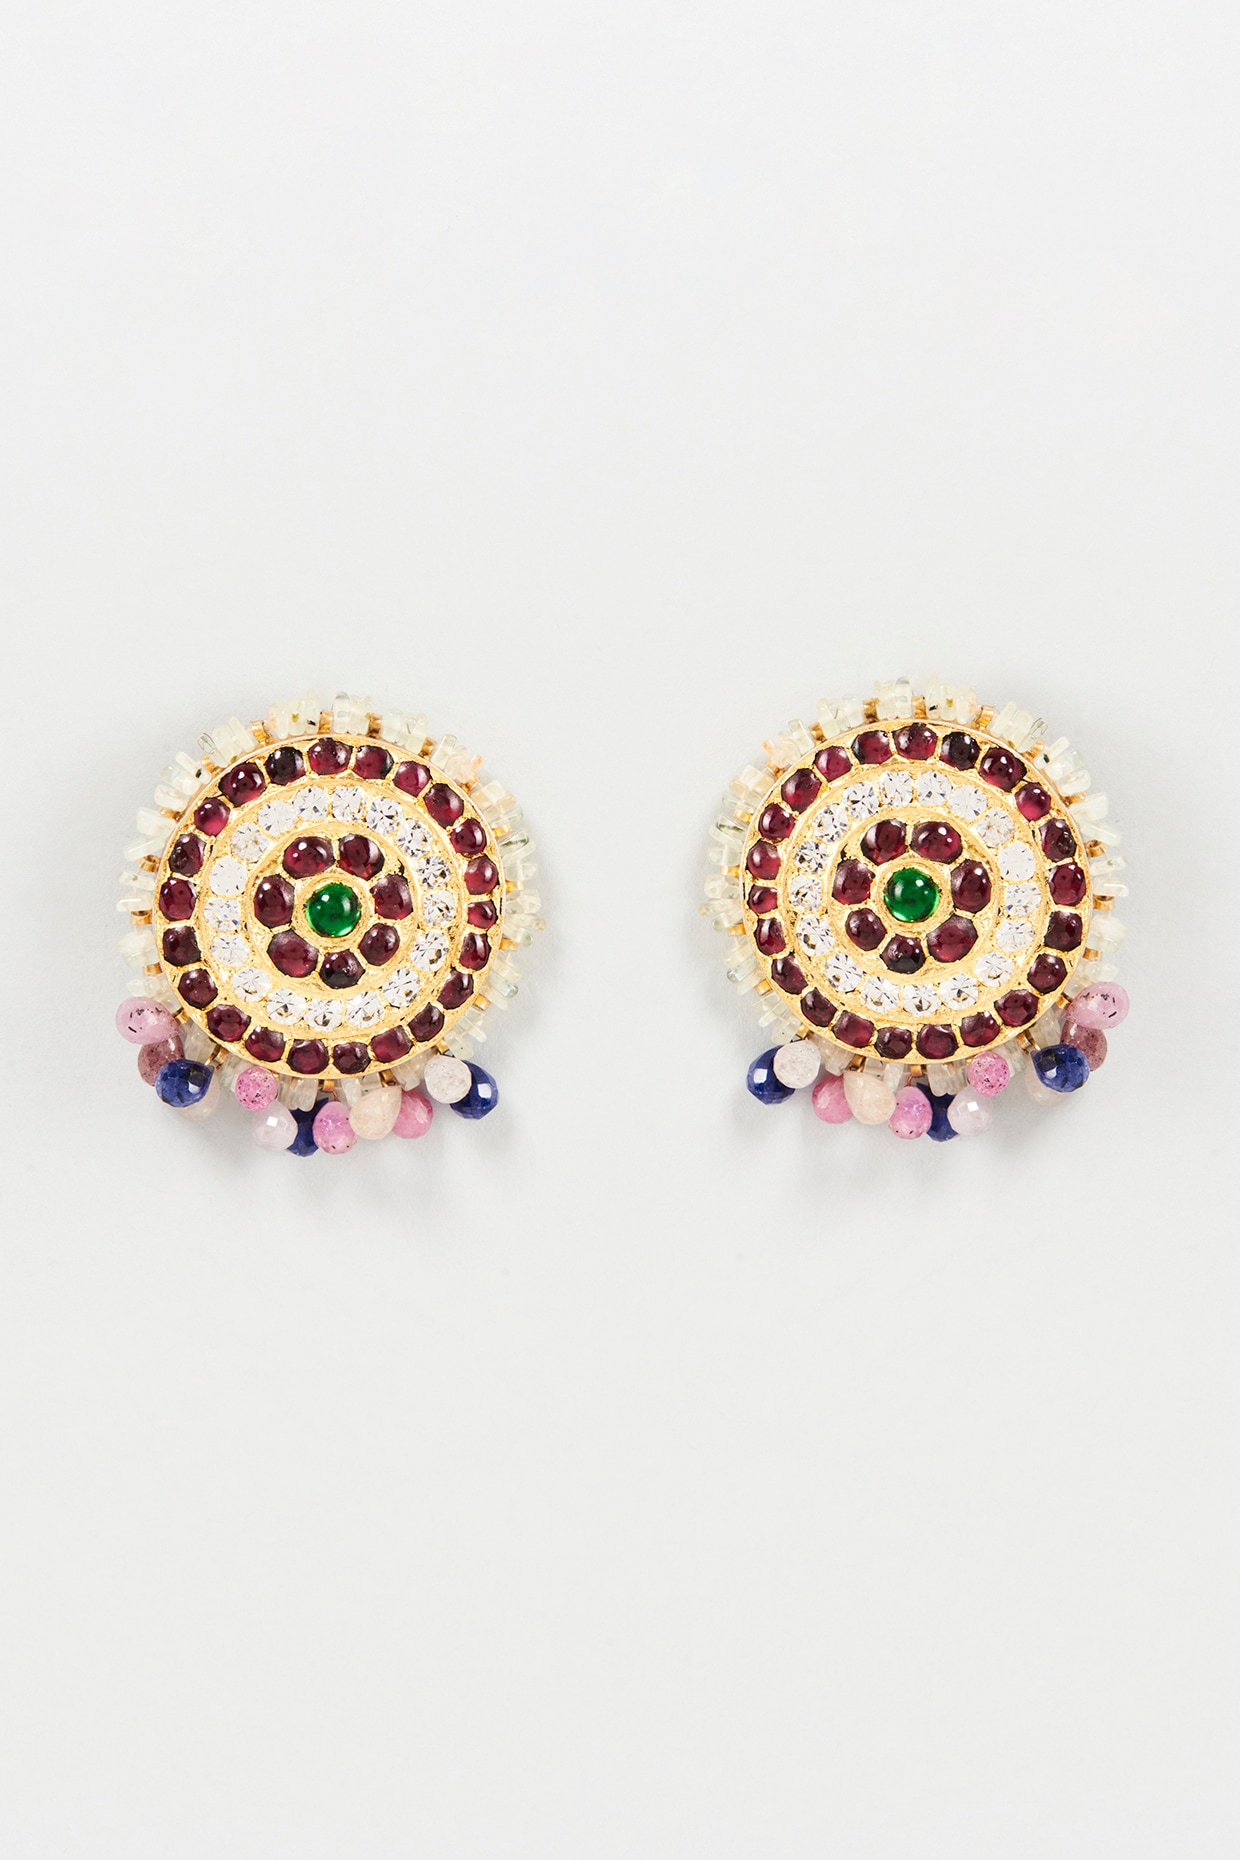 Details more than 239 precious stone earrings studs